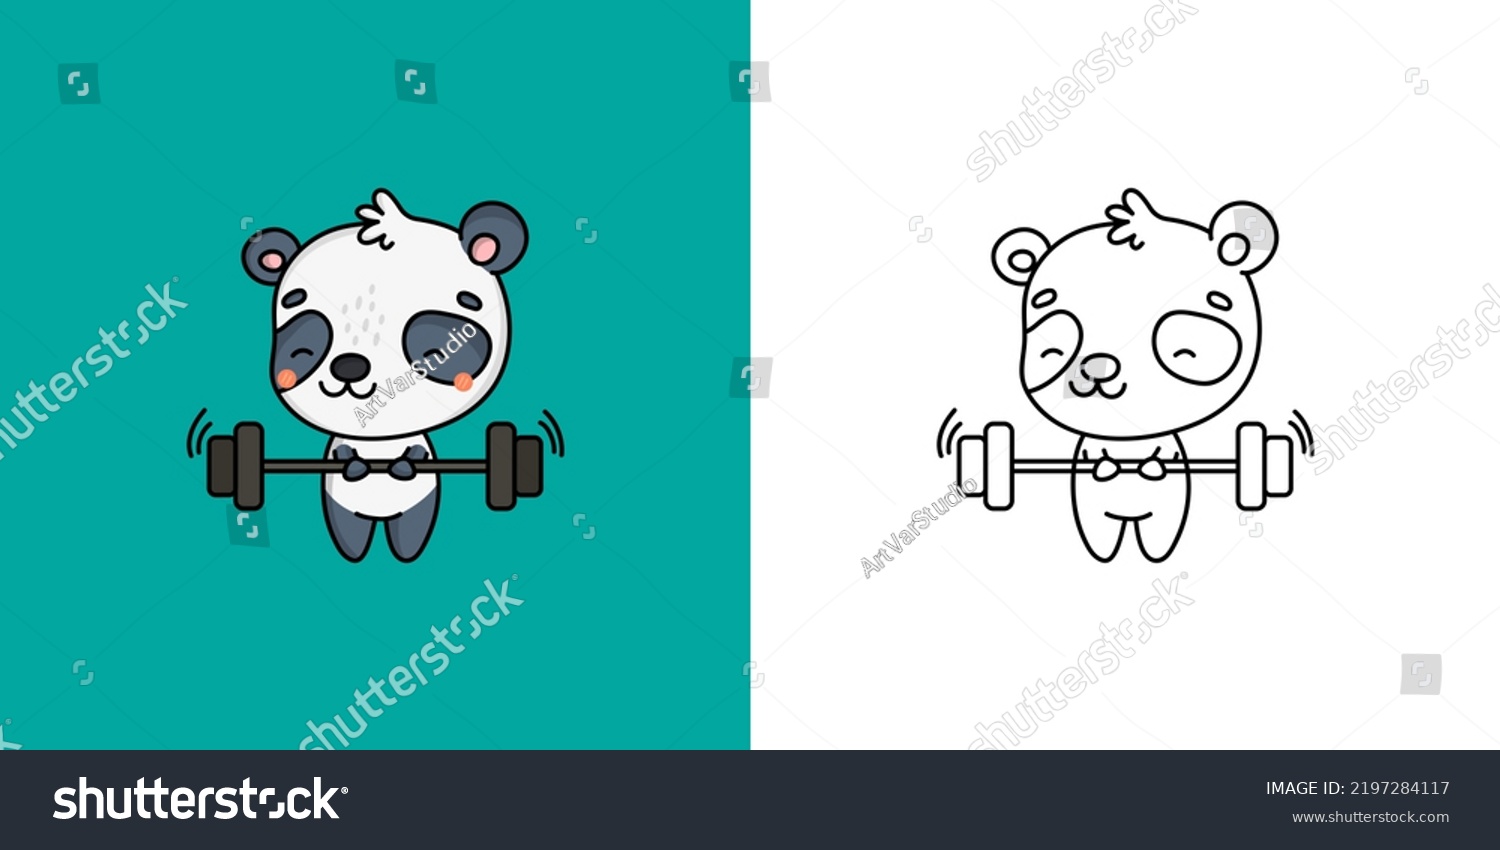 SVG of Set Clipart Panda Bear Sportsman Multicolored and Black and White. Kawaii Panda Sportsman. Vector Illustration of a Kawaii Animal for Prints for Clothes, Stickers, Baby Shower, Coloring Pages.
 svg